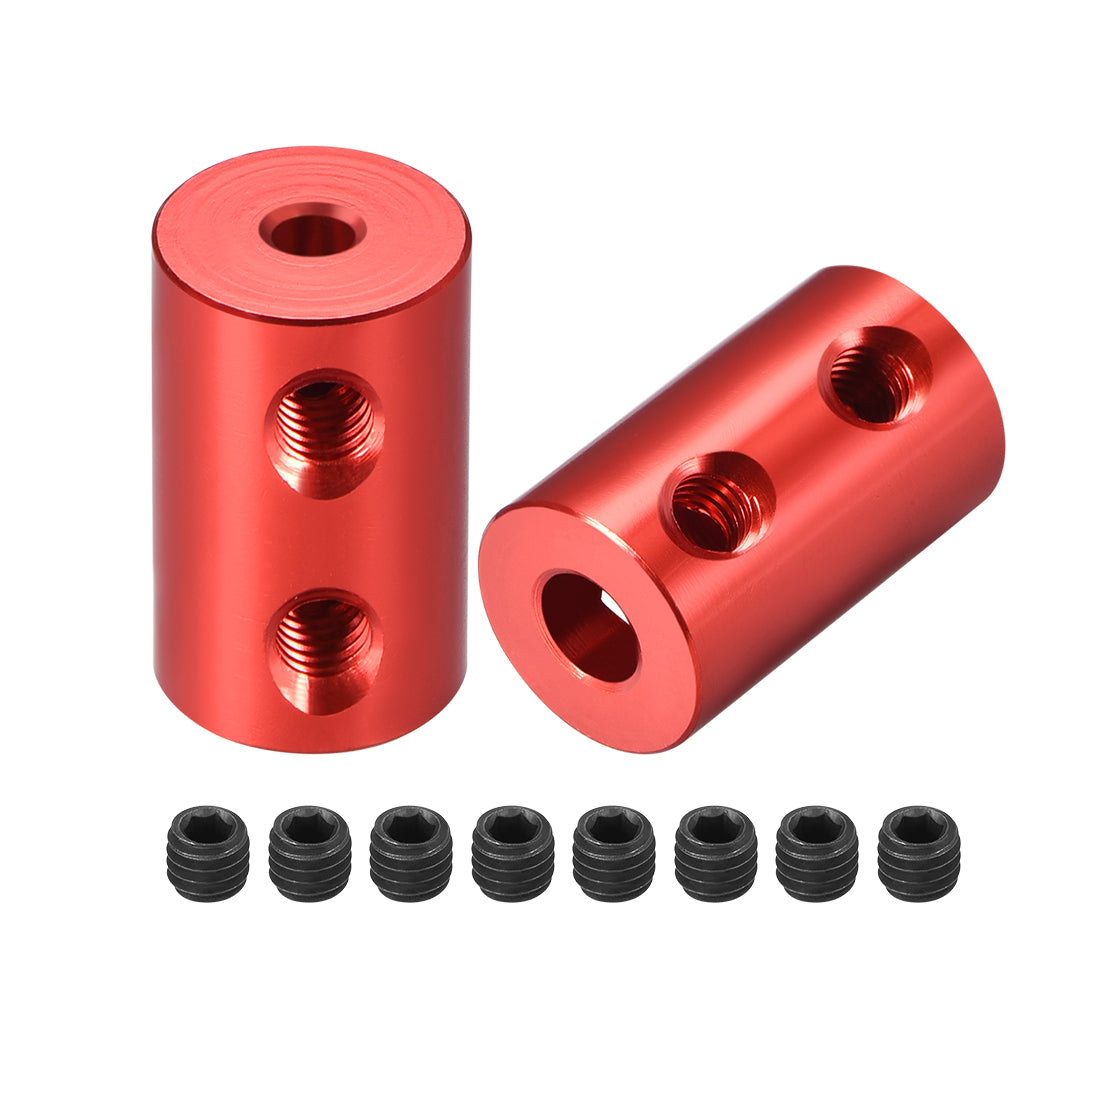 uxcell Uxcell Shaft Coupling 3mm to 5mm Bore L20xD12 Robot Motor Wheel Rigid Coupler Connector Red 2 Pcs